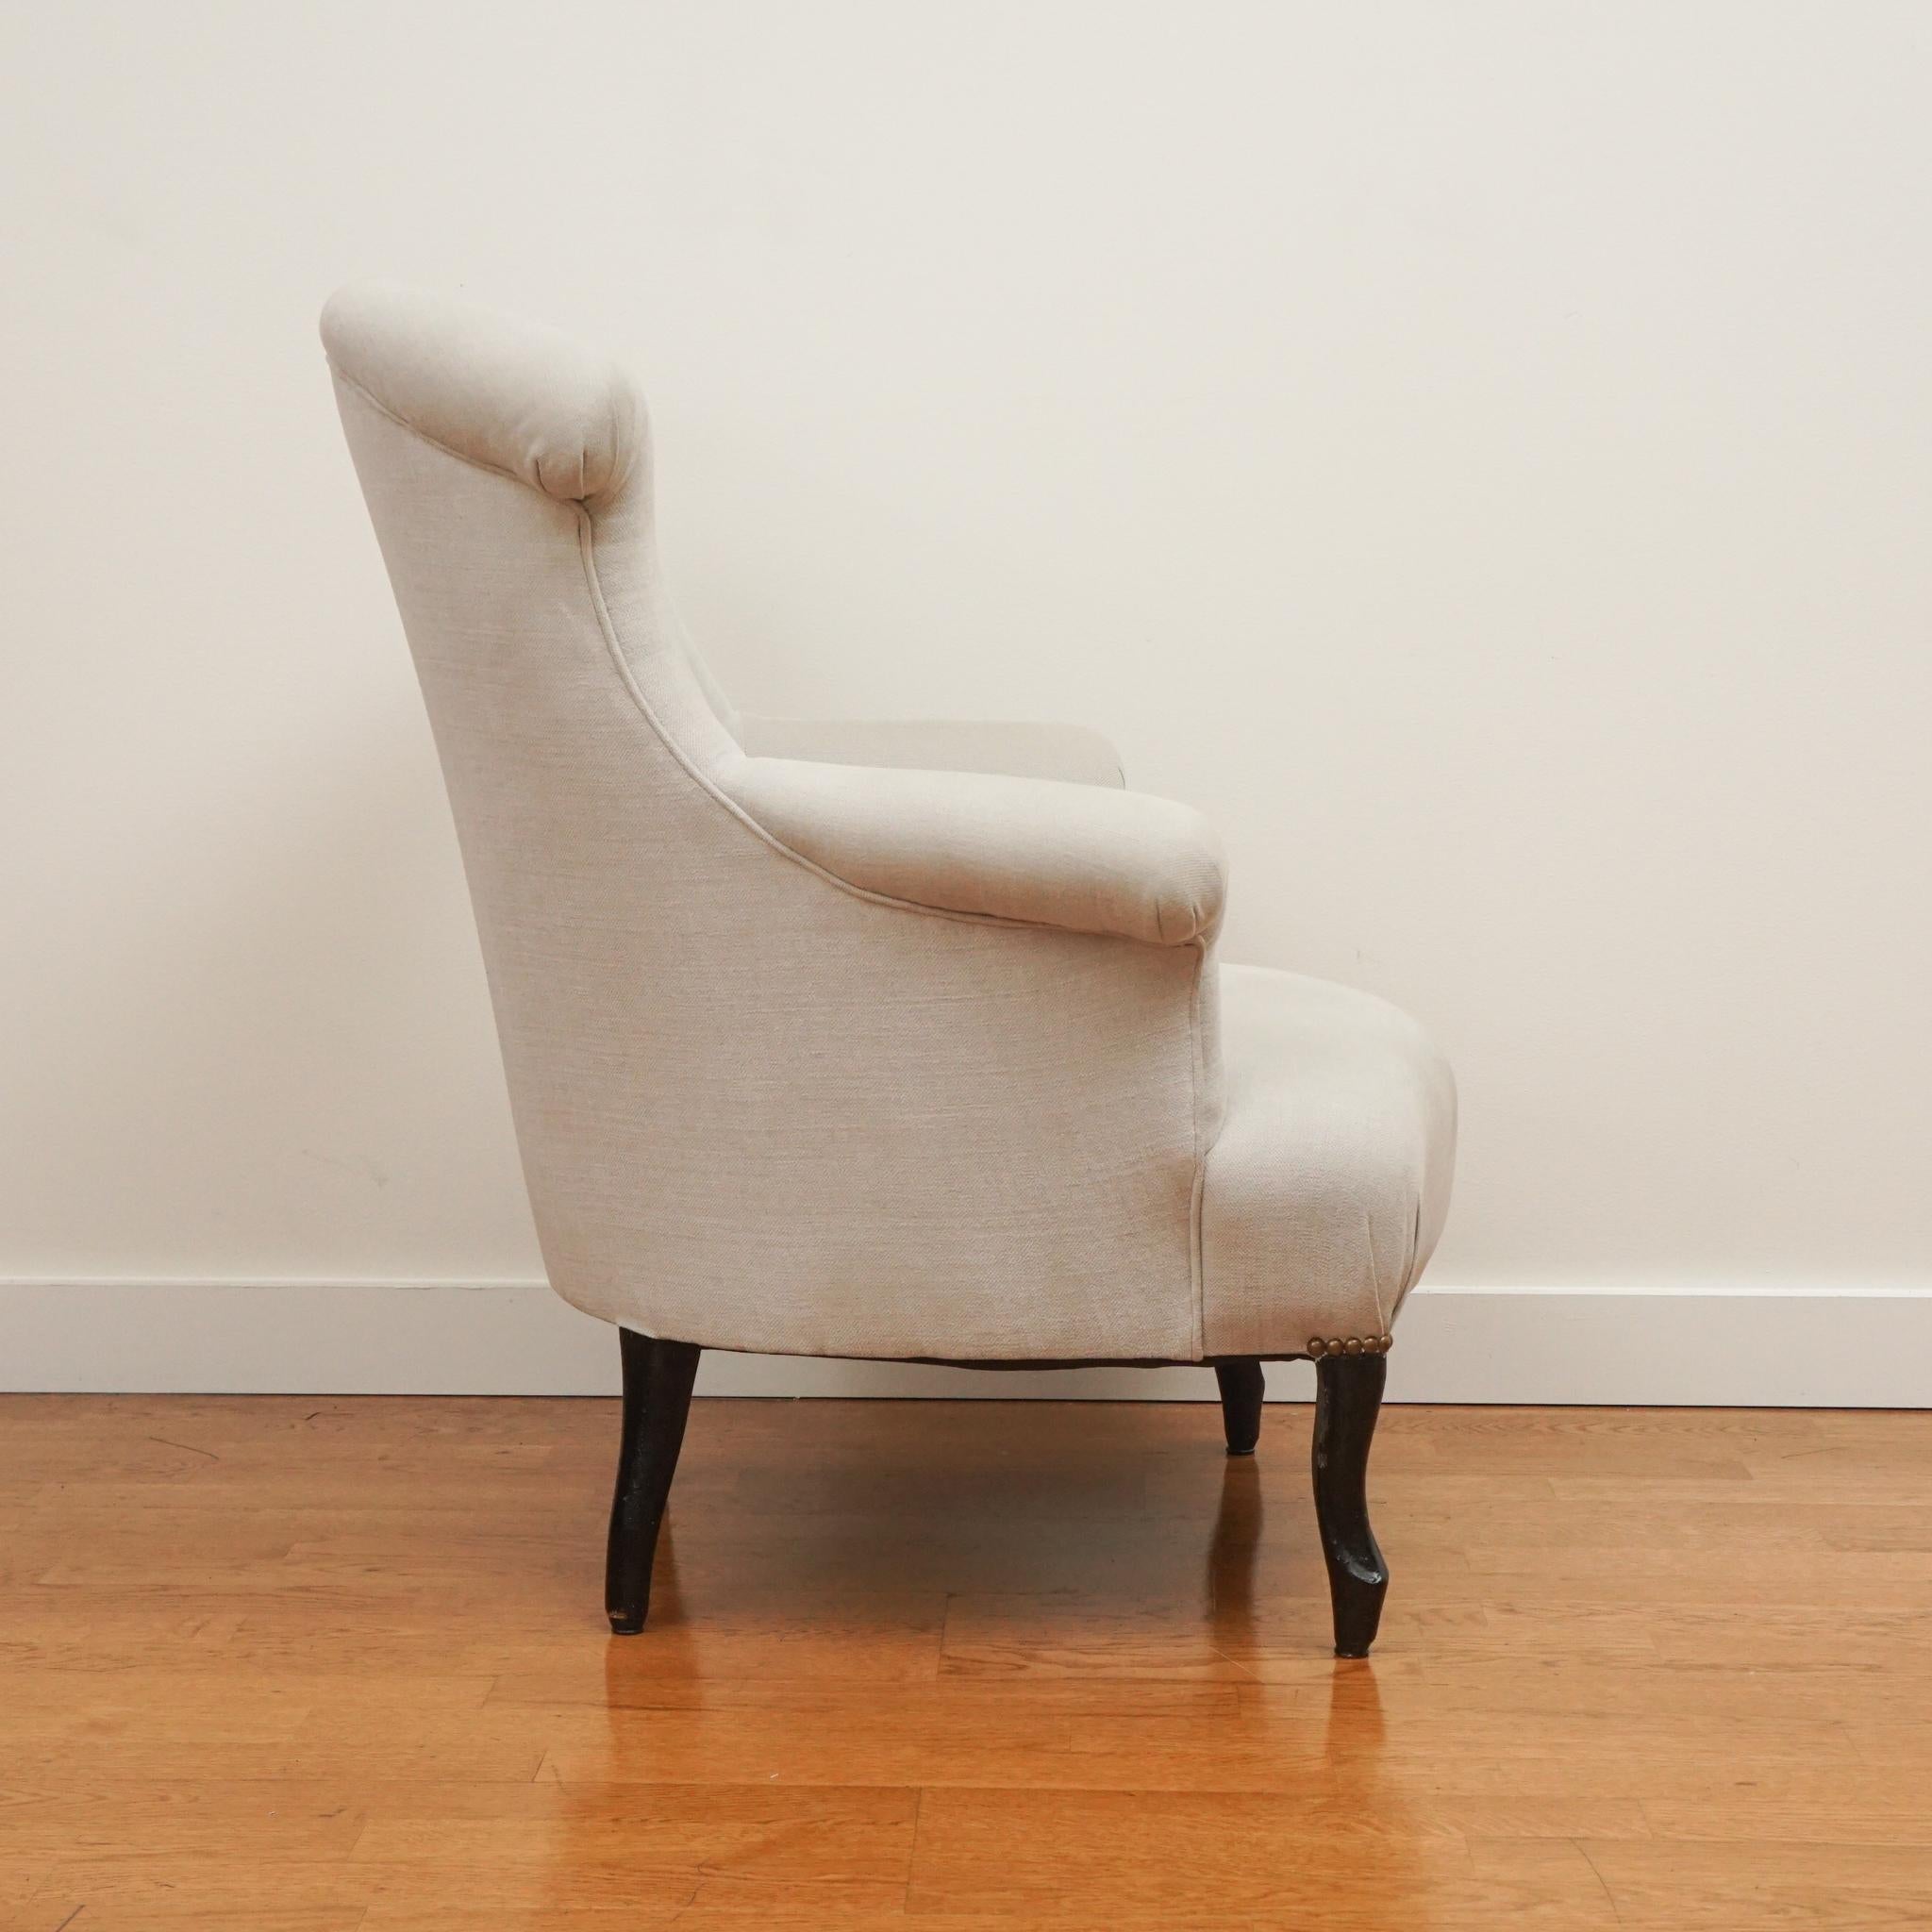 French Stylized Mid-Century Modern Upholstered Wing Chair